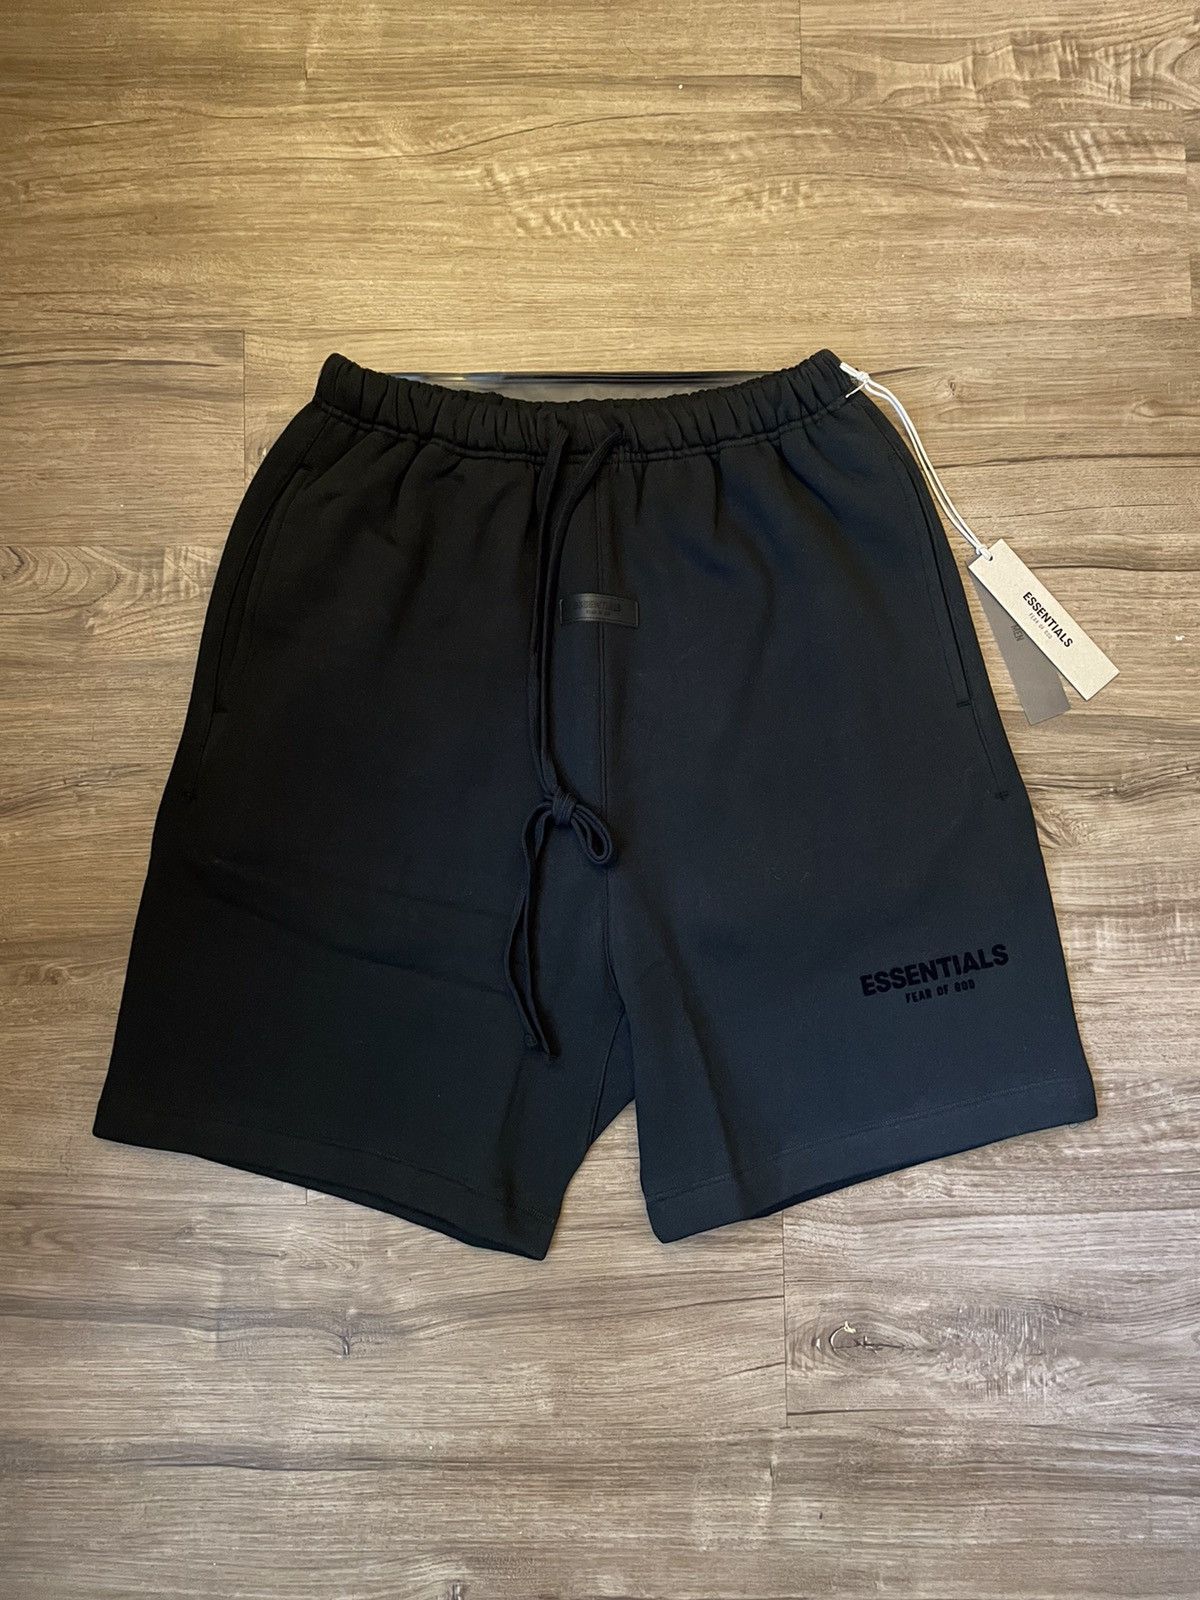 Fear of God Fear of God Essentials Sweat Shorts Stretch Limo Size S |  Grailed